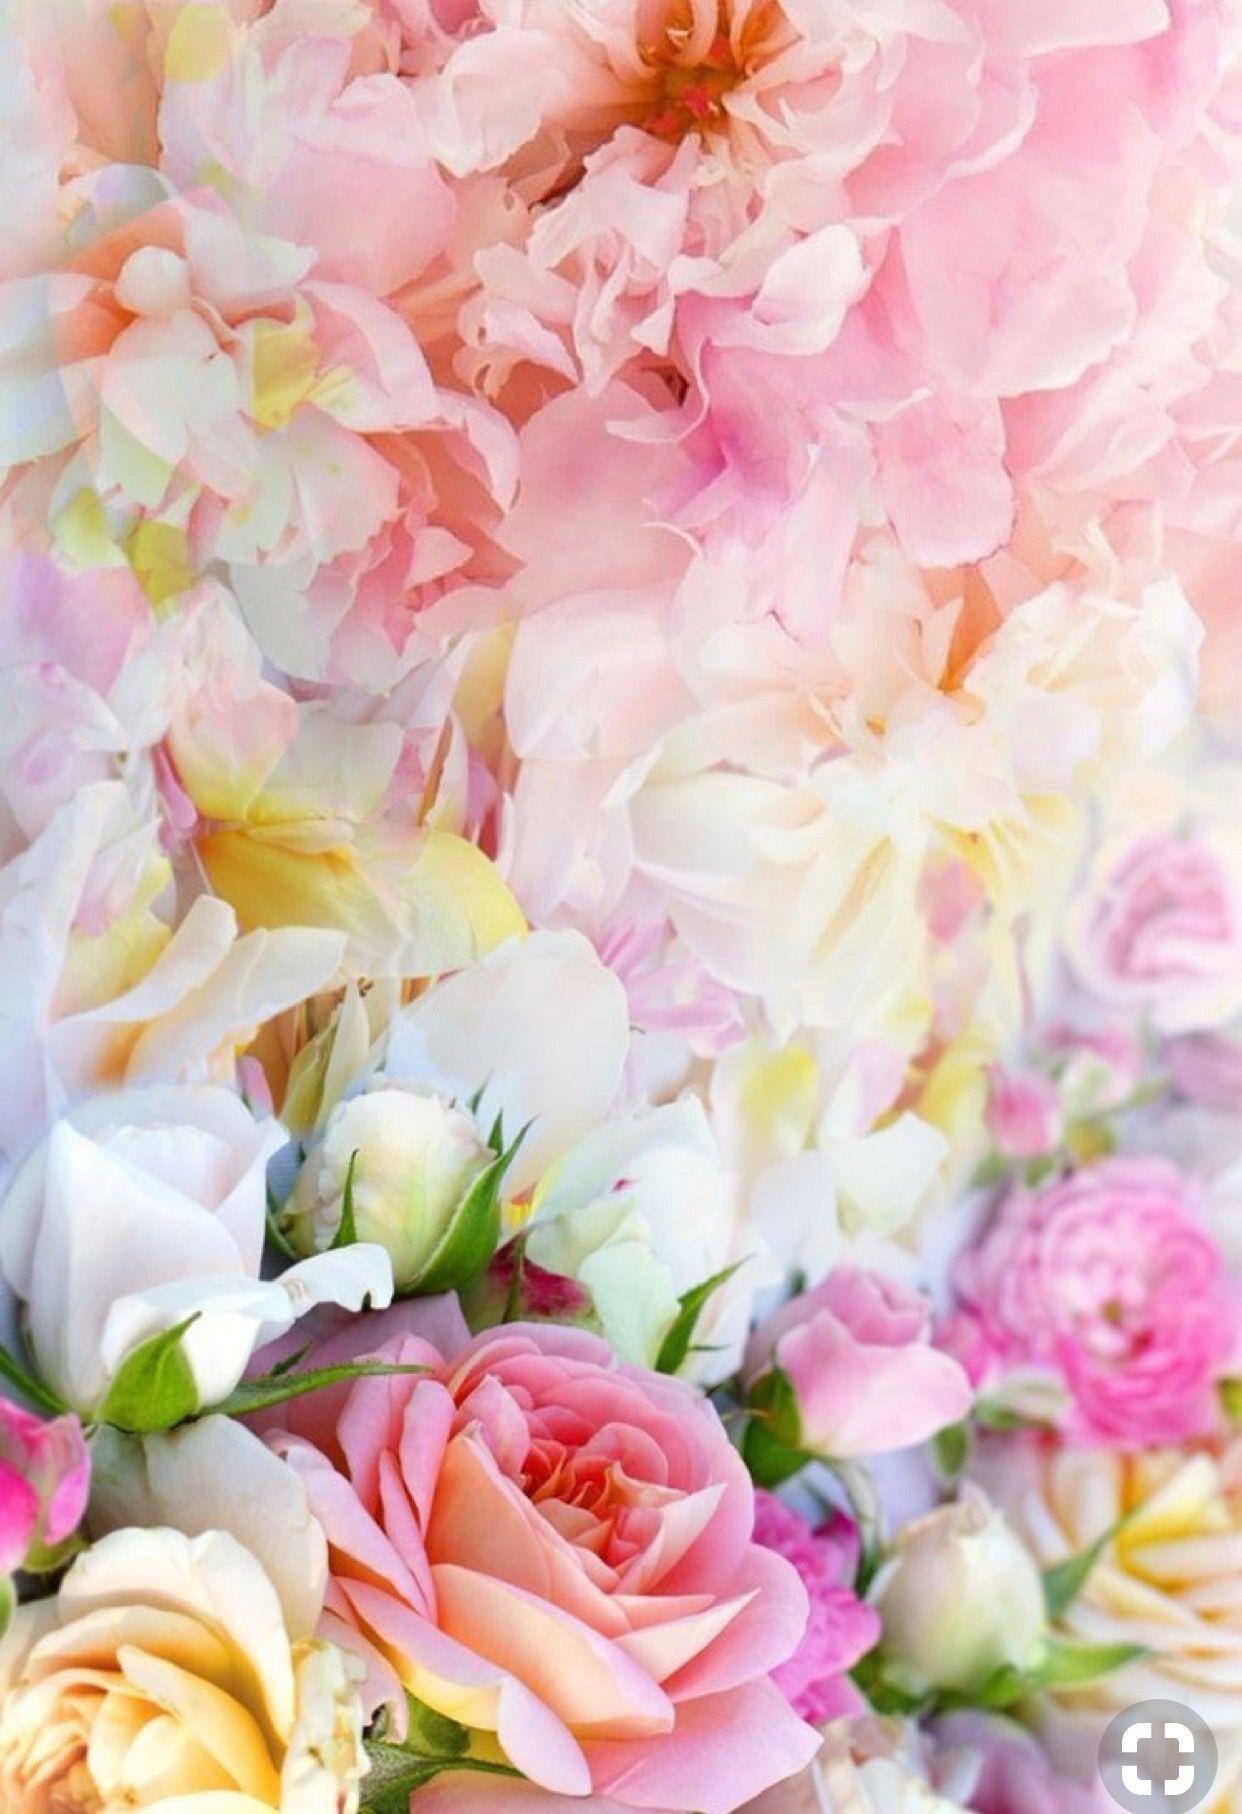 Pink and White Flower Wallpapers - Top Free Pink and White Flower